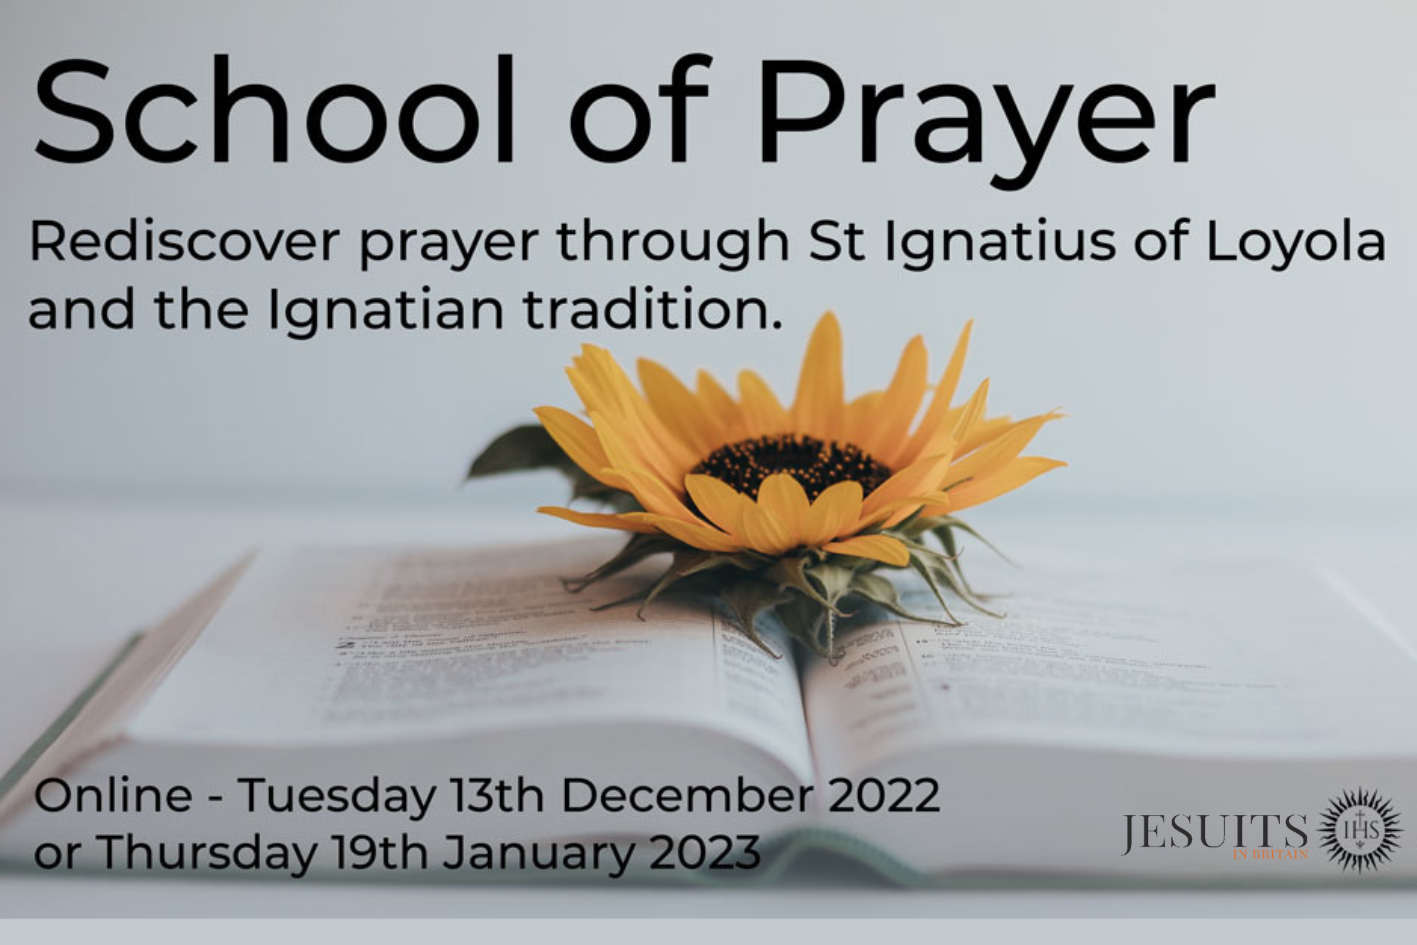 School of Prayer on Saturday 12th and Tuesday 13th December. Jesuits